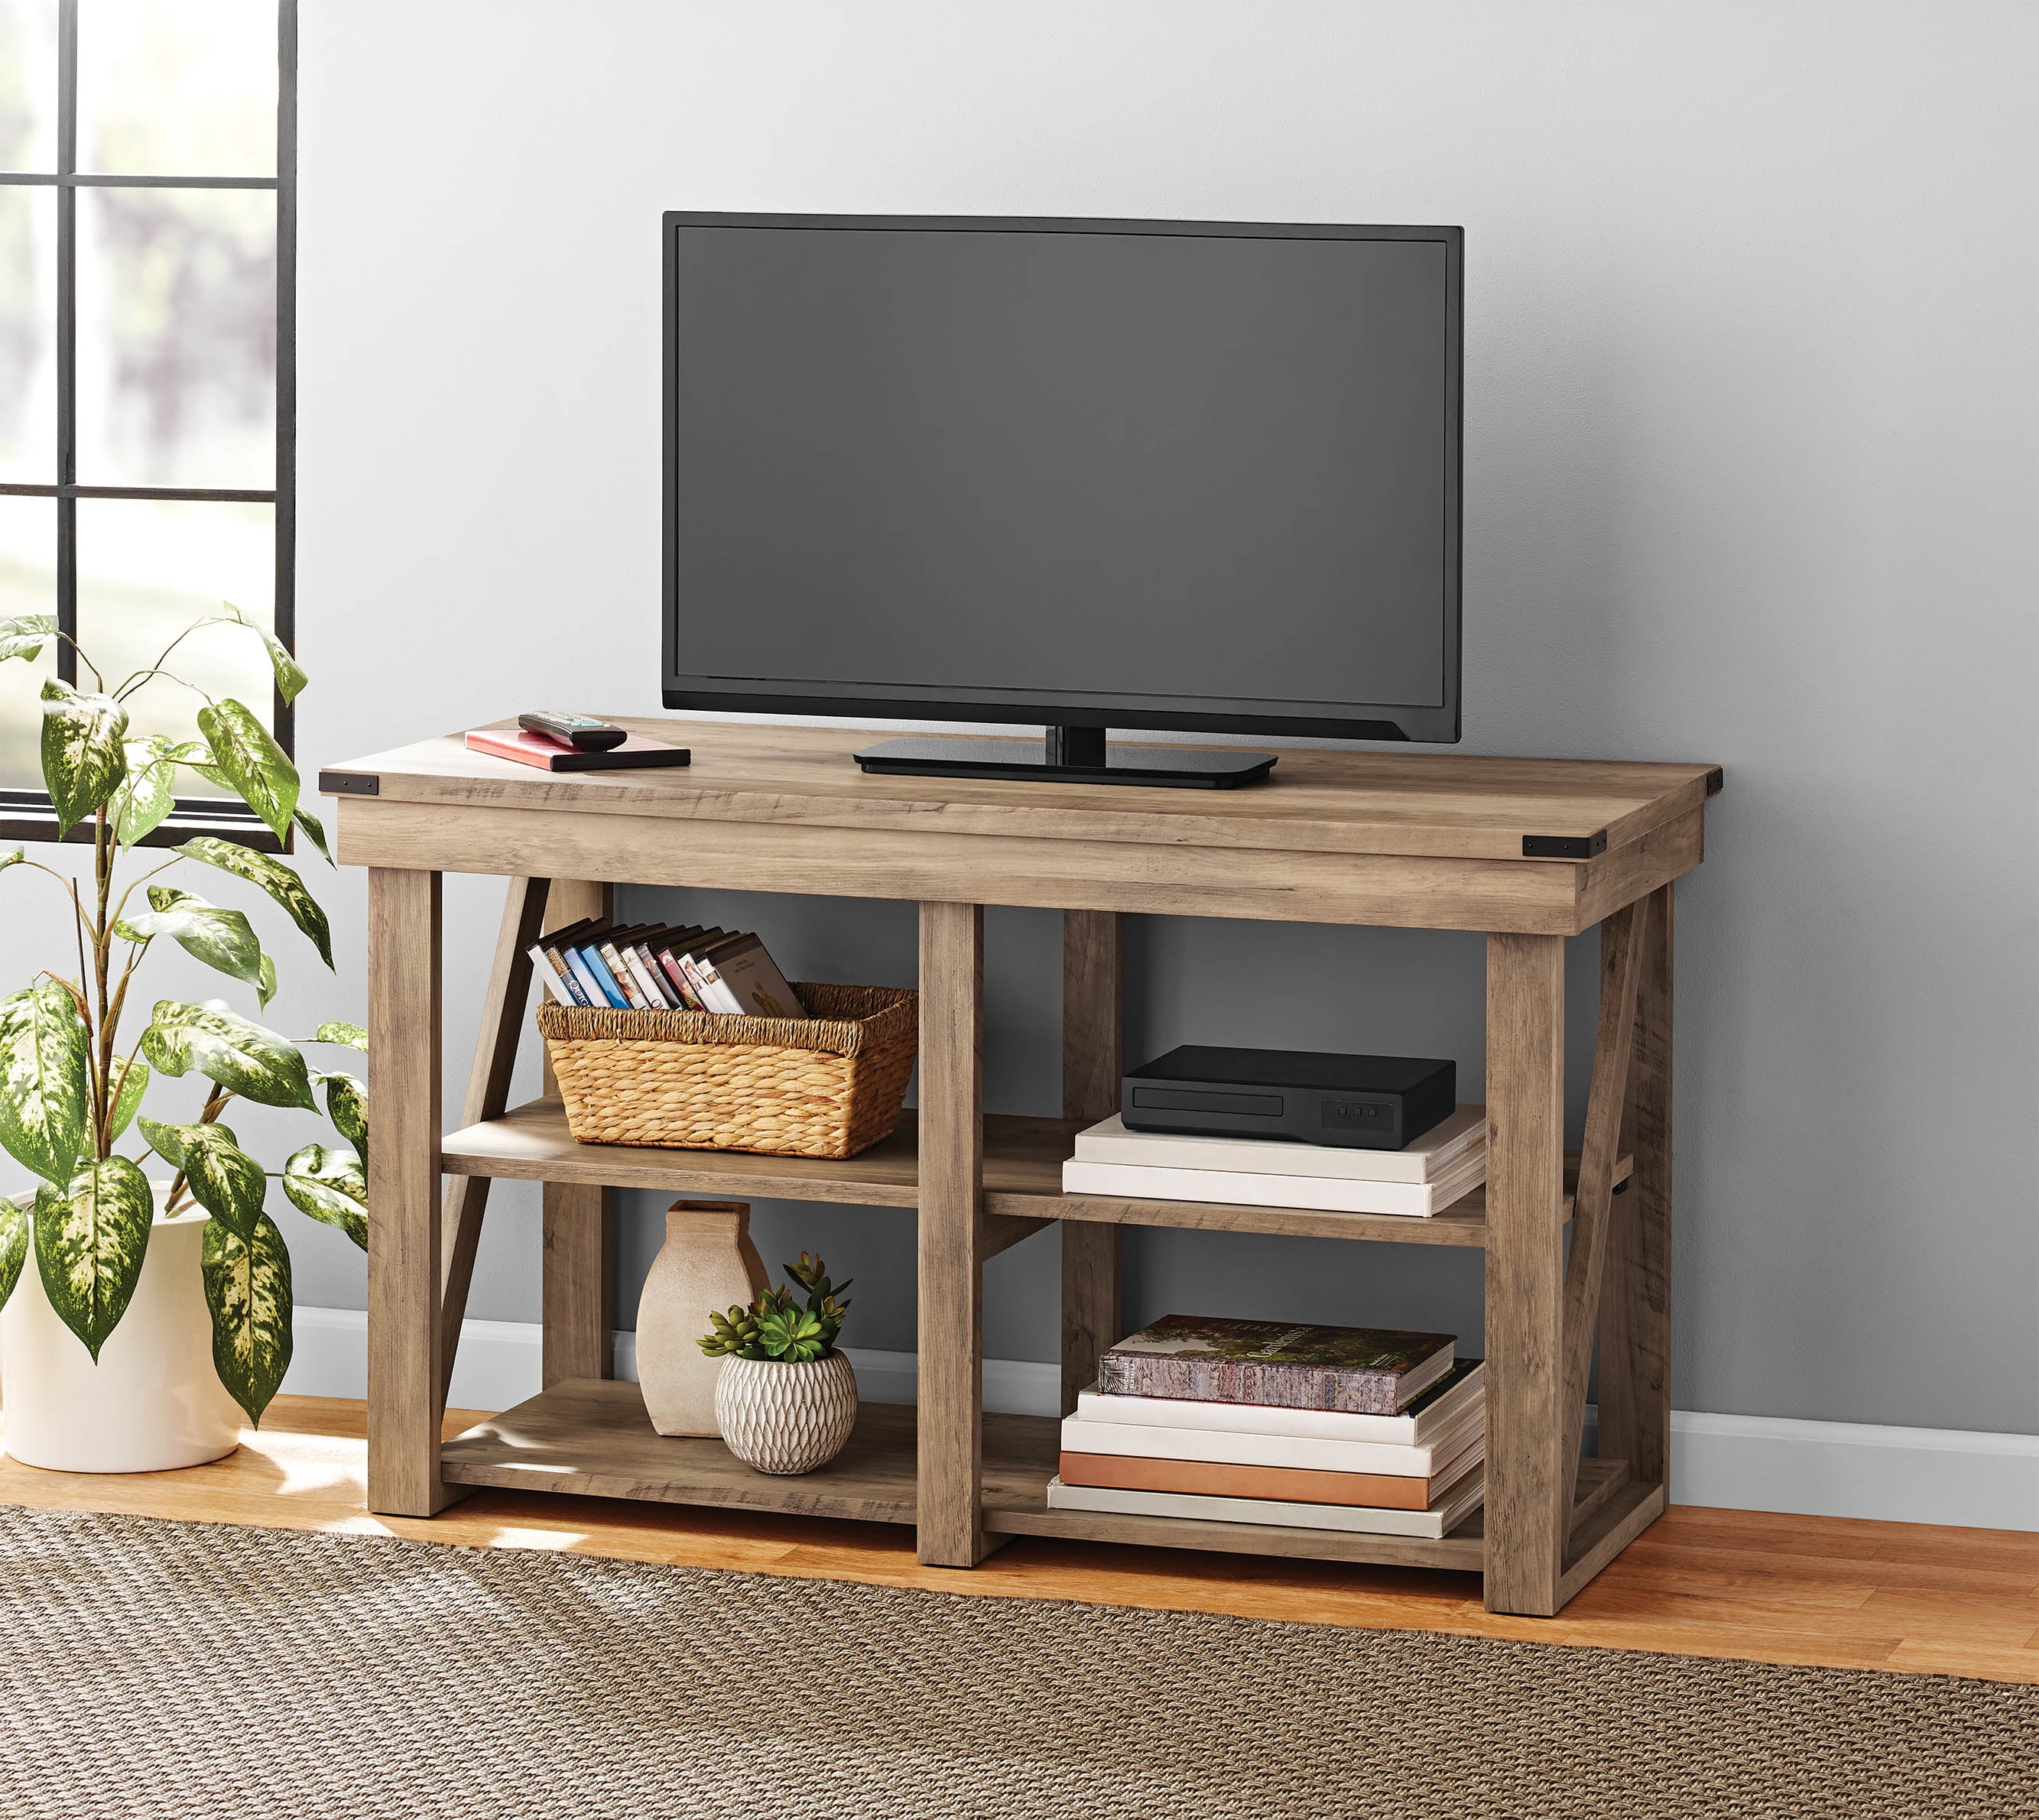 Mainstays Lawson TV Stand for TVs up to 55", Rustic Oak ...